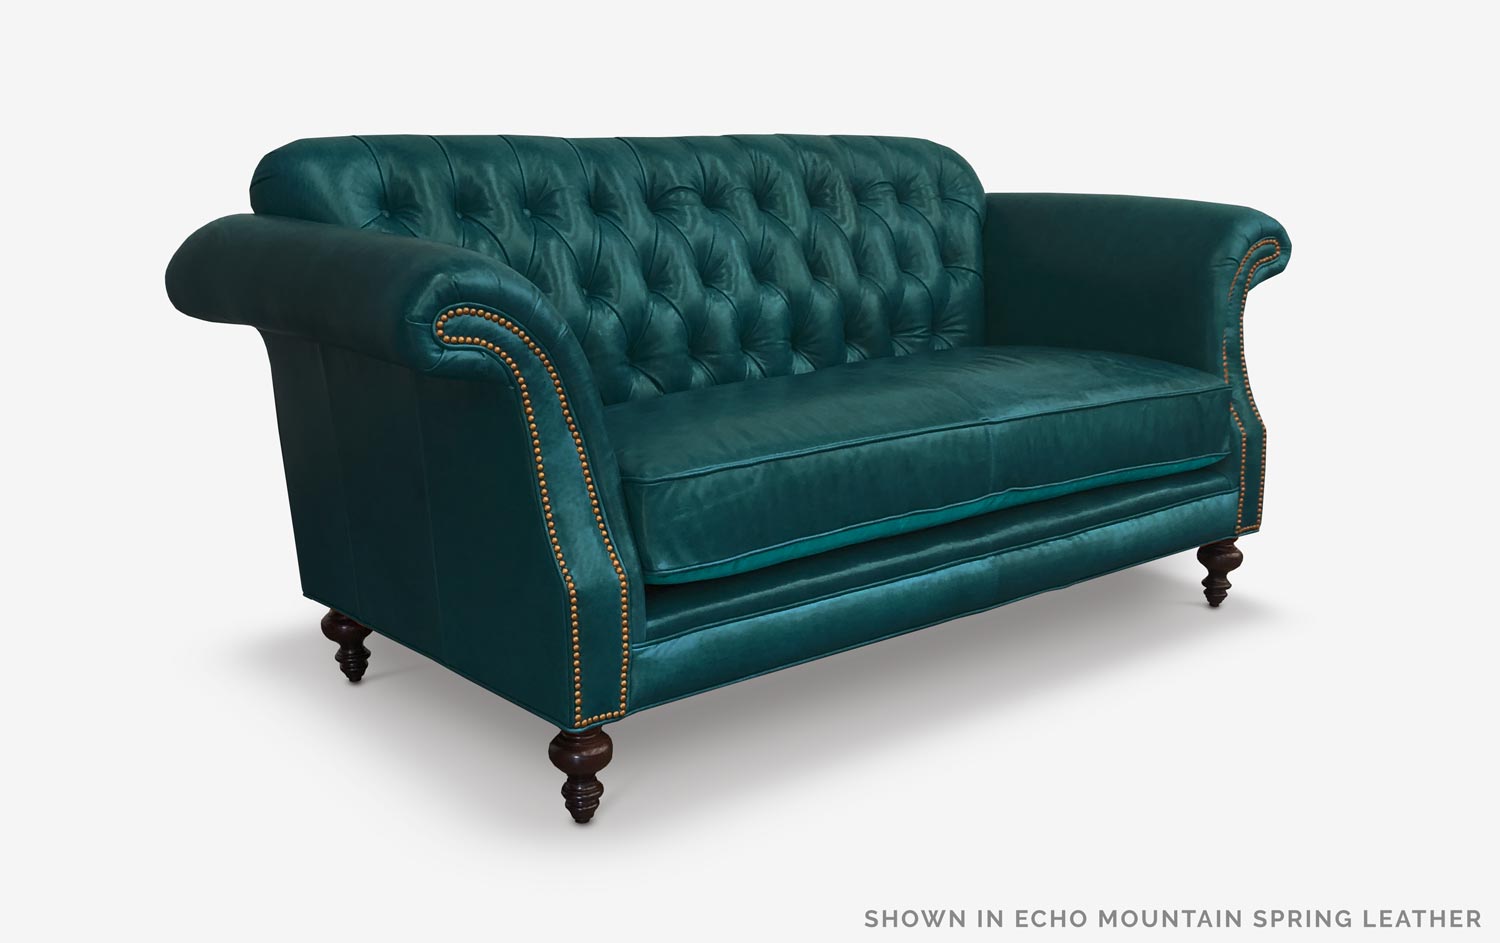 The Riley: High Back Scroll Arm Tufted Chesterfield Love Seat in Echo Mountain Spring Leather